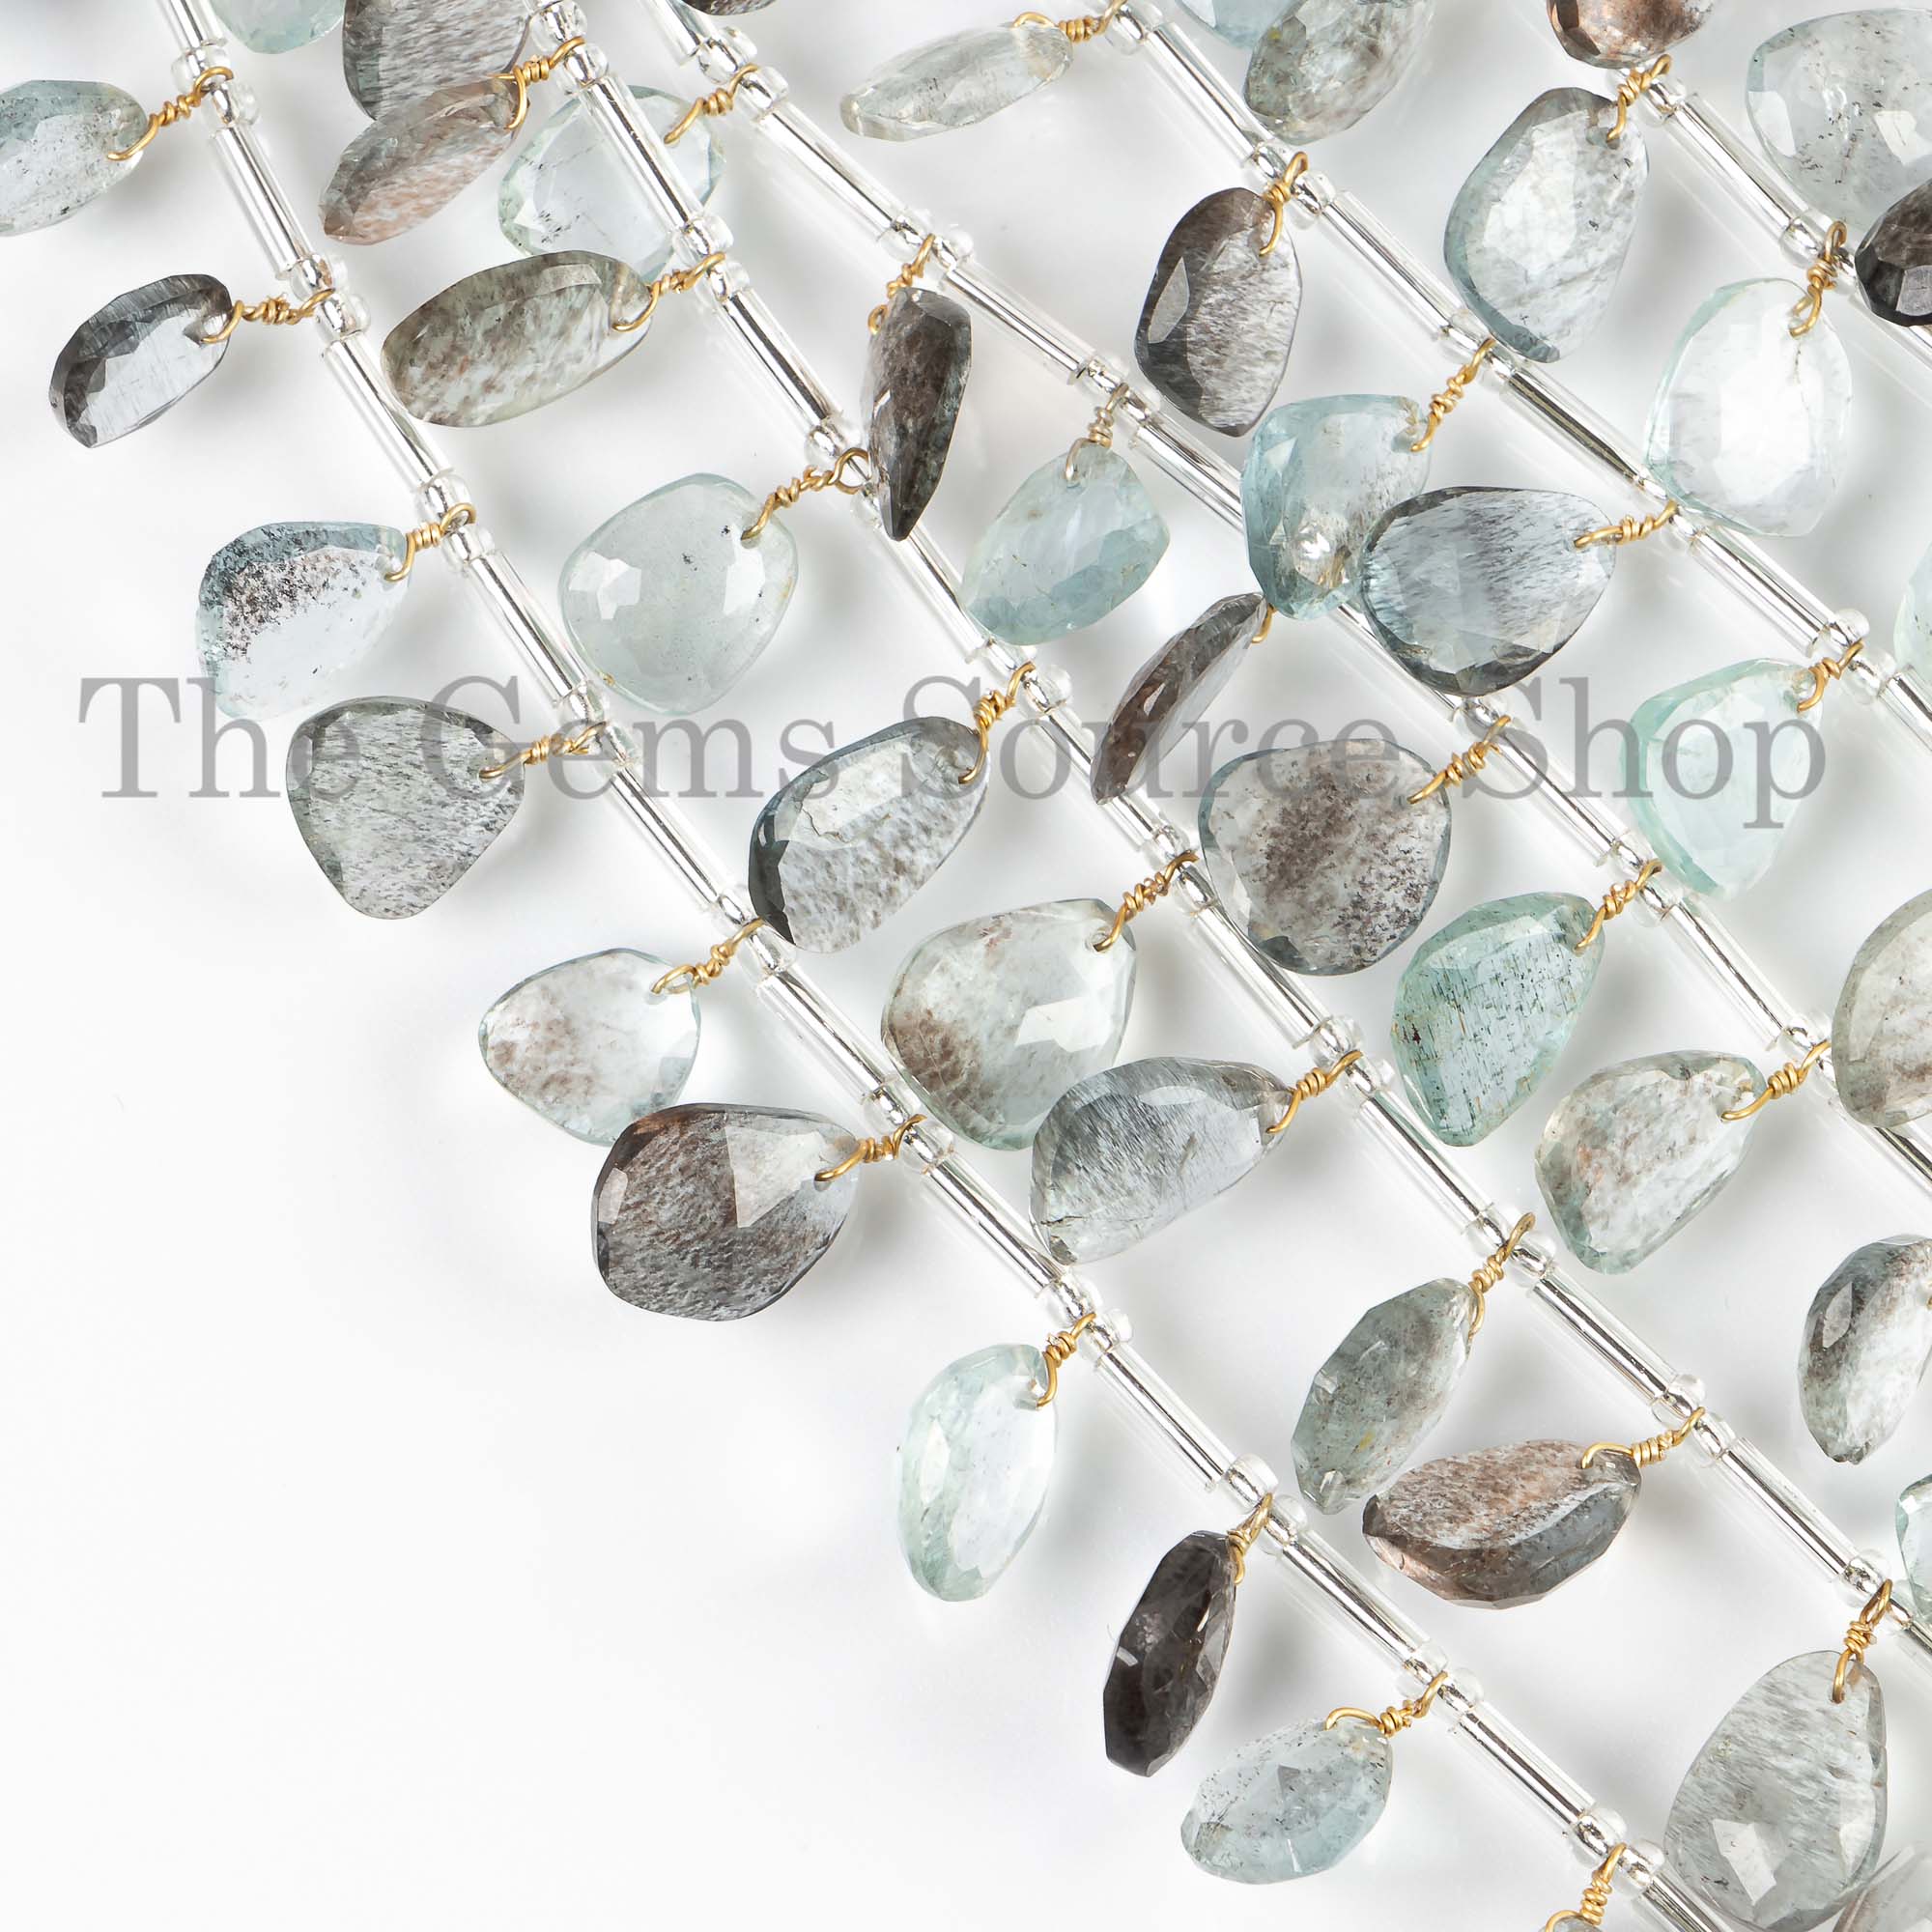 Moss Aquamarine Rose Cut Beads, Moss Aquamarine Gemstone Briolette, Flat Fancy Beads, Front to Back Drill Beads, Face Drill Beads, Cab Bead